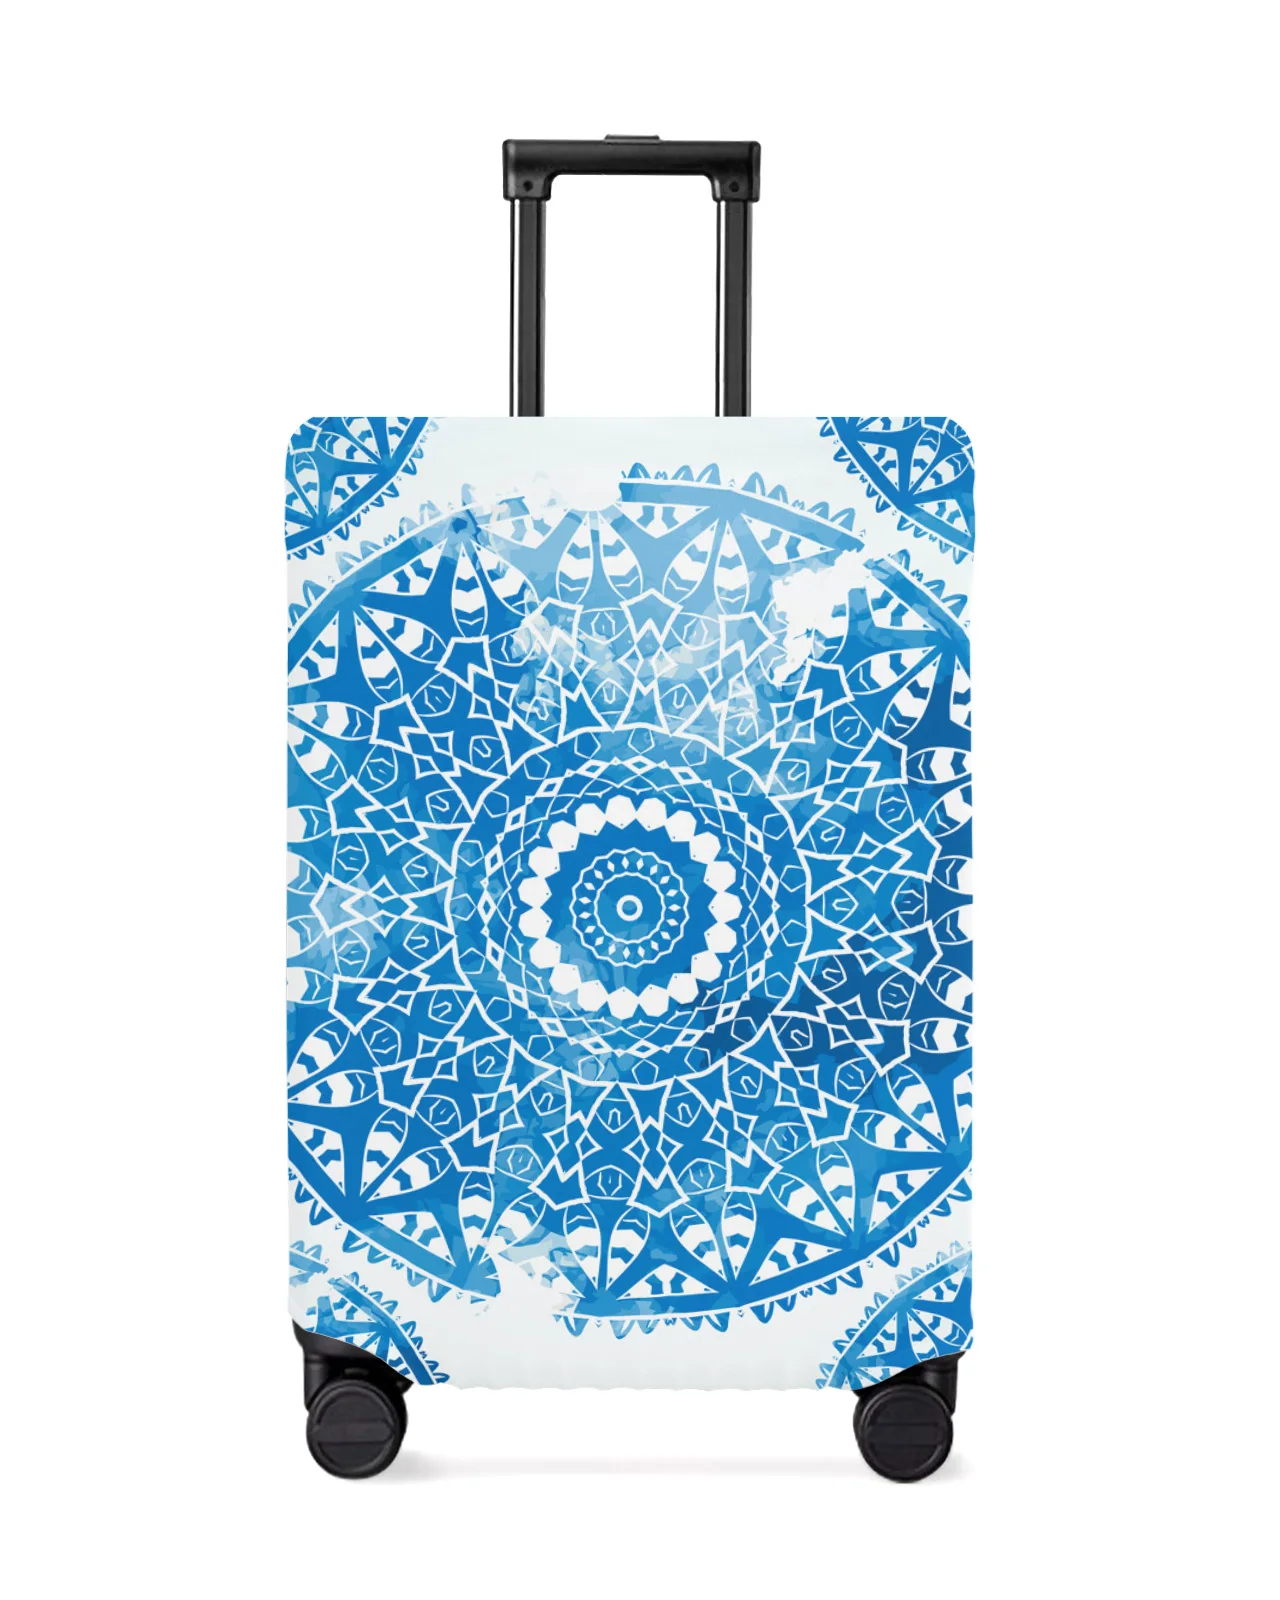 

Mandala Retro Travel Luggage Protective Cover for 18-32 Inch Travel Accessories Suitcase Elastic Dust Duffle Case Protect Sleeve